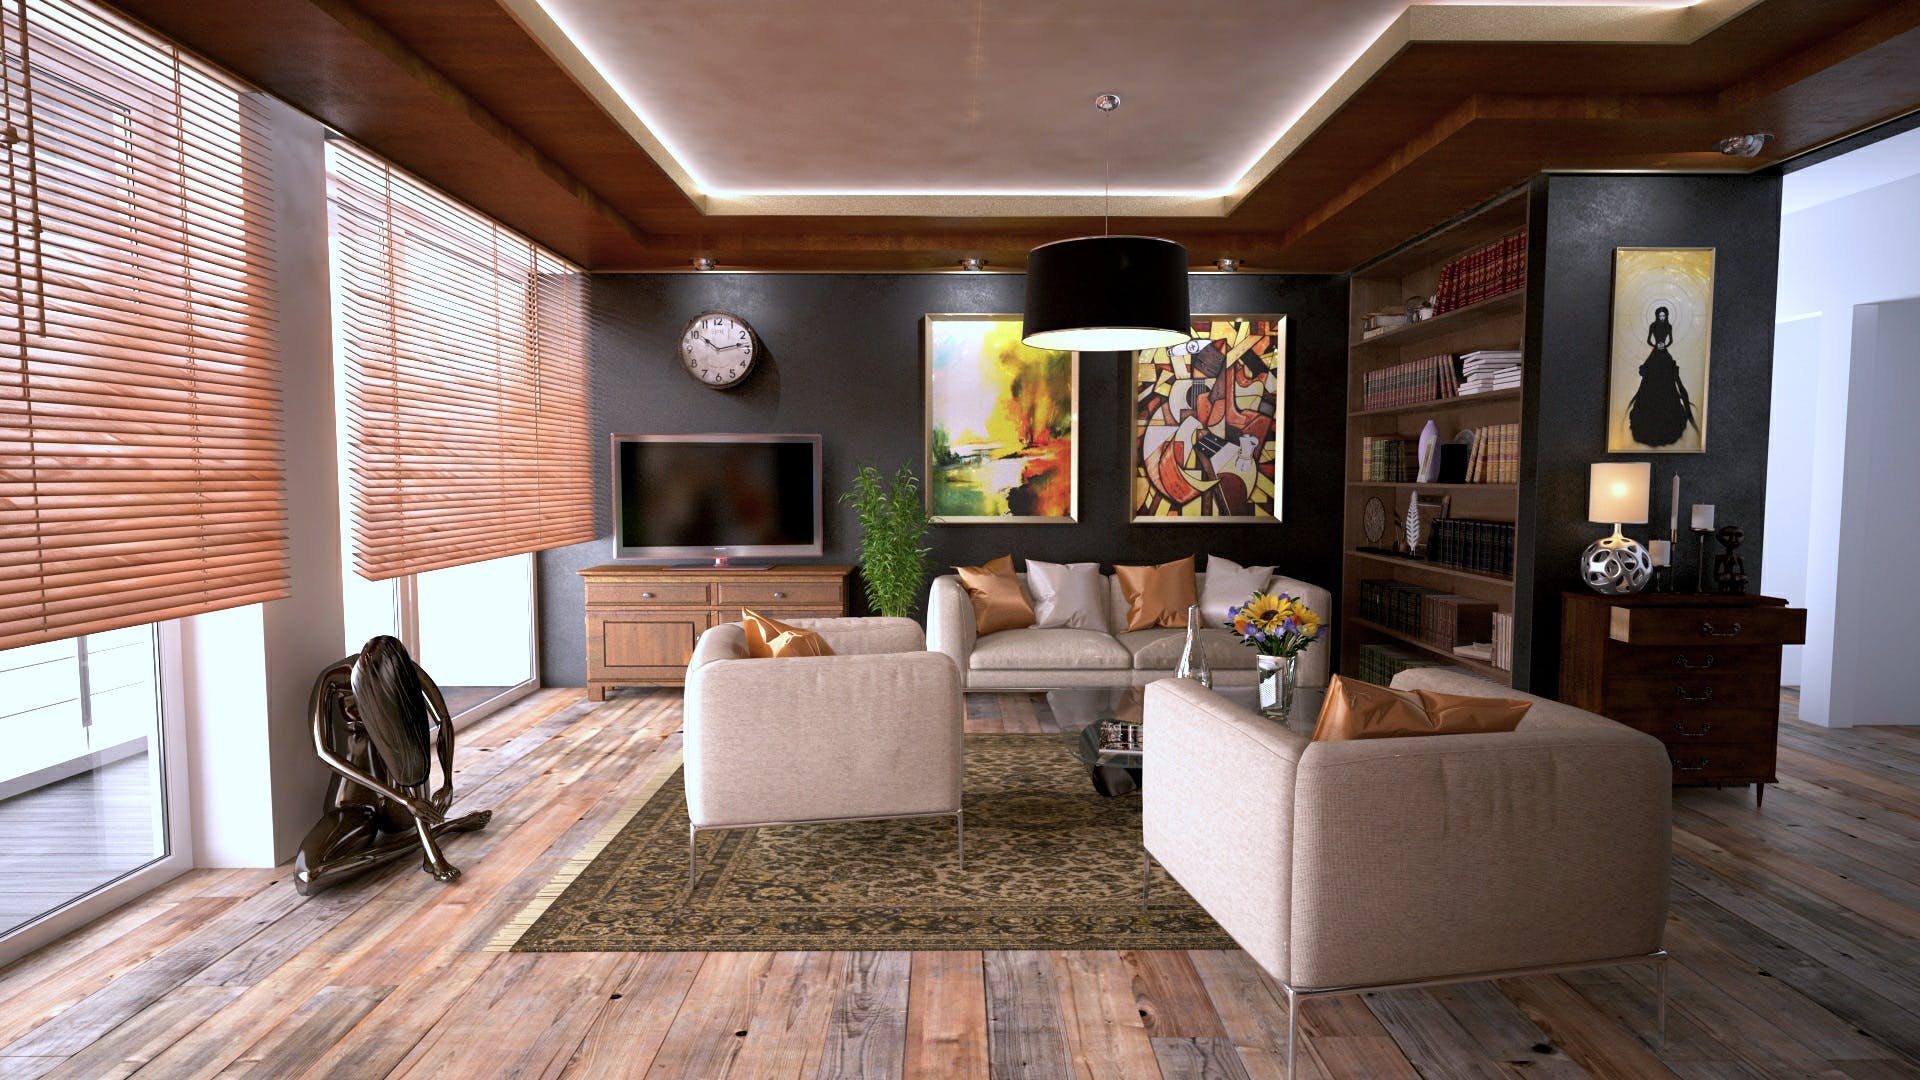 A study with a rustic wooden aesthetic, including wooden blinds to enhance the aesthetic